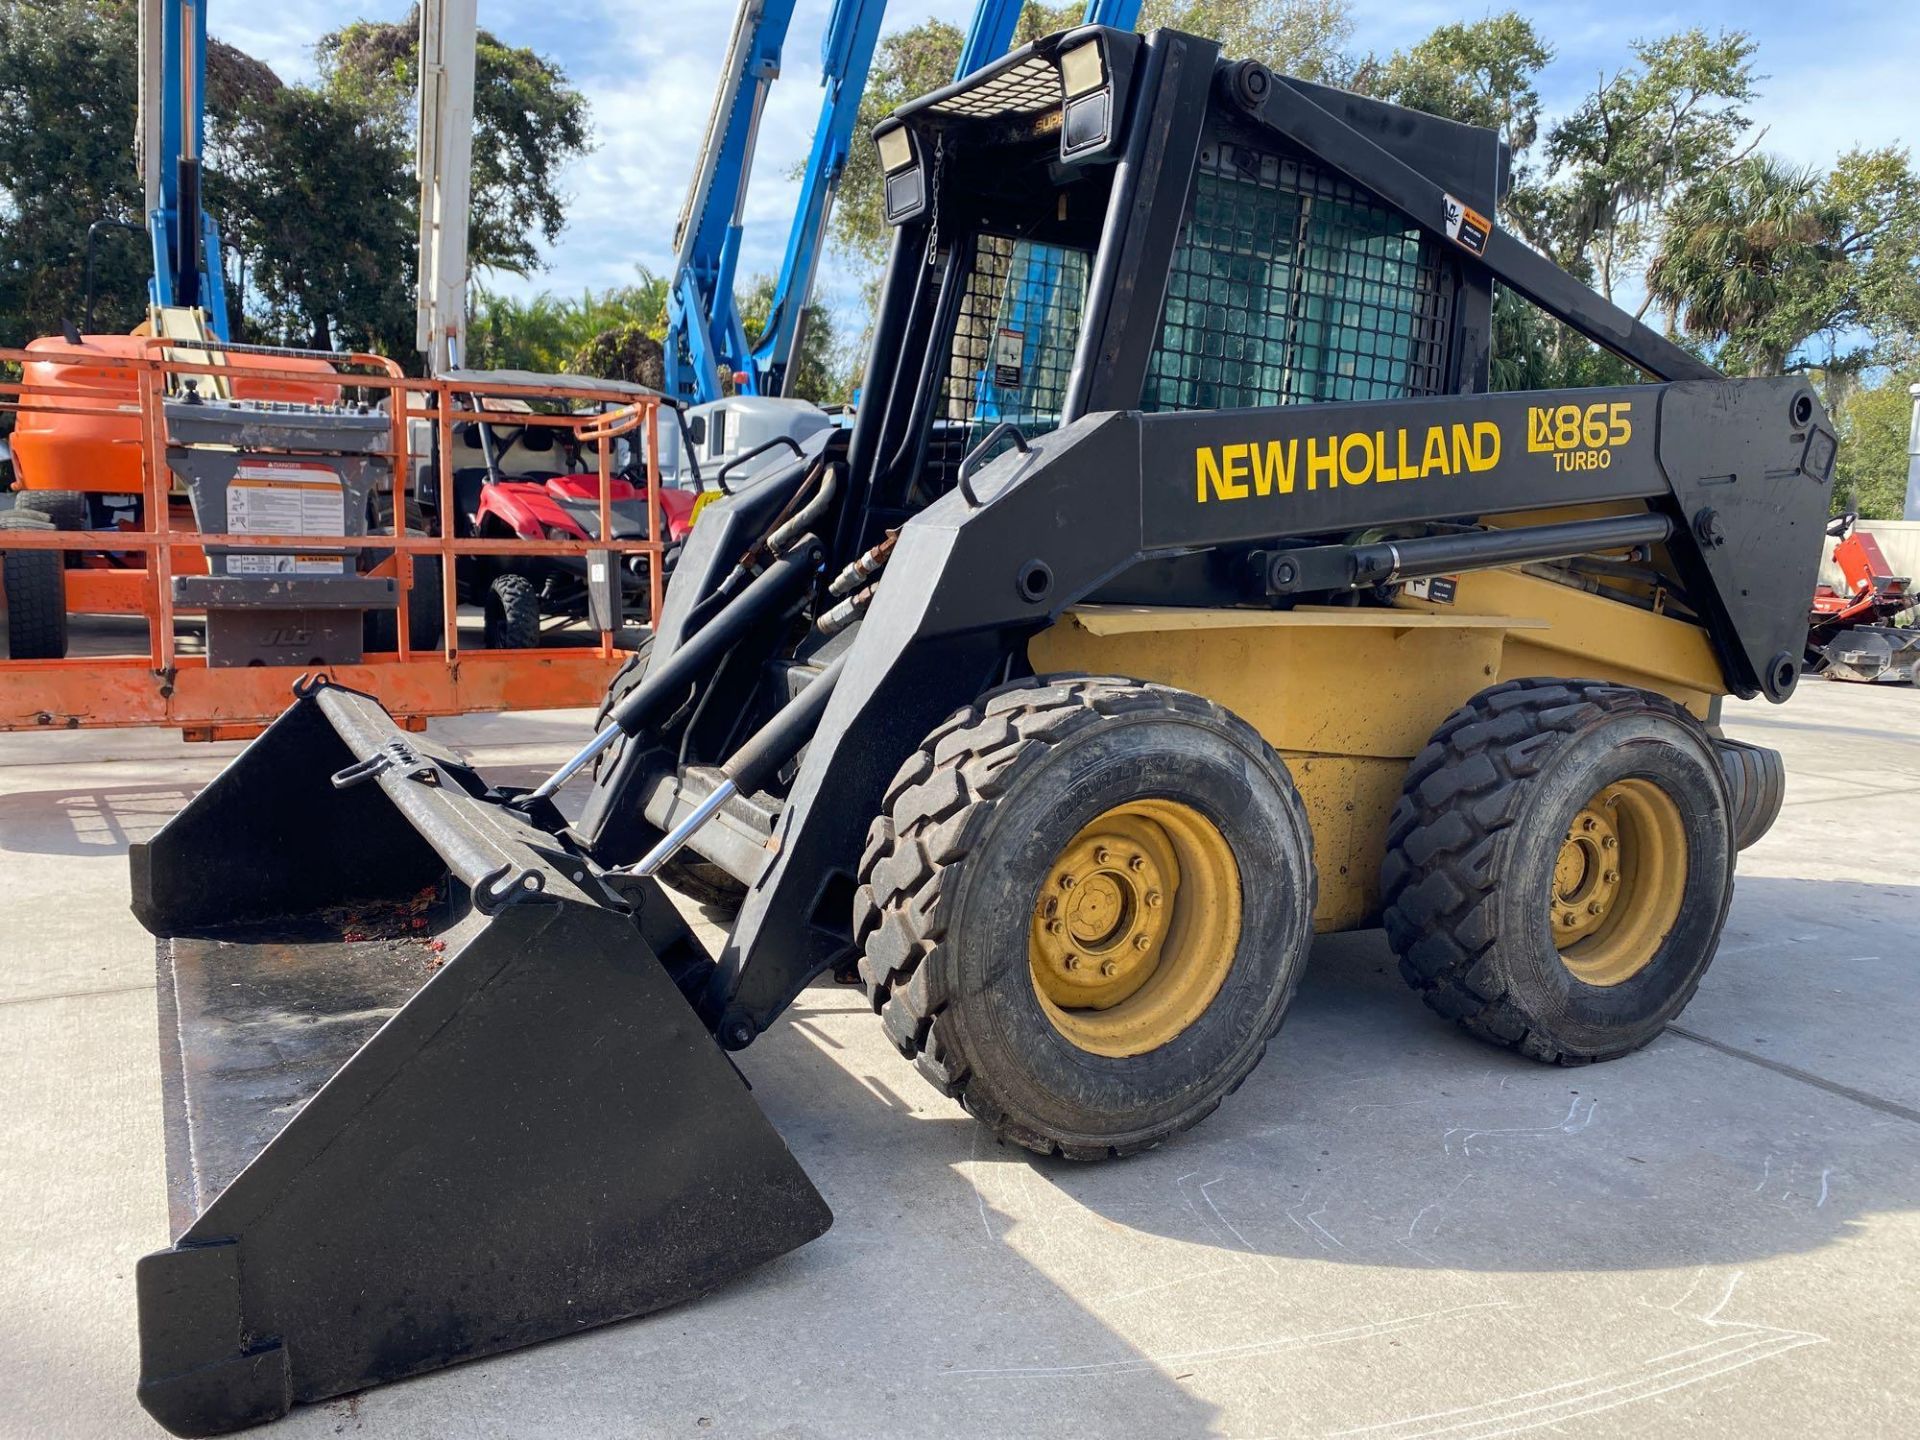 NEW HOLLAND LX865 TURBO DIESEL SKID STEER, BUCKET ATTACHMENT, RUNS AND OPERATES - Image 3 of 5